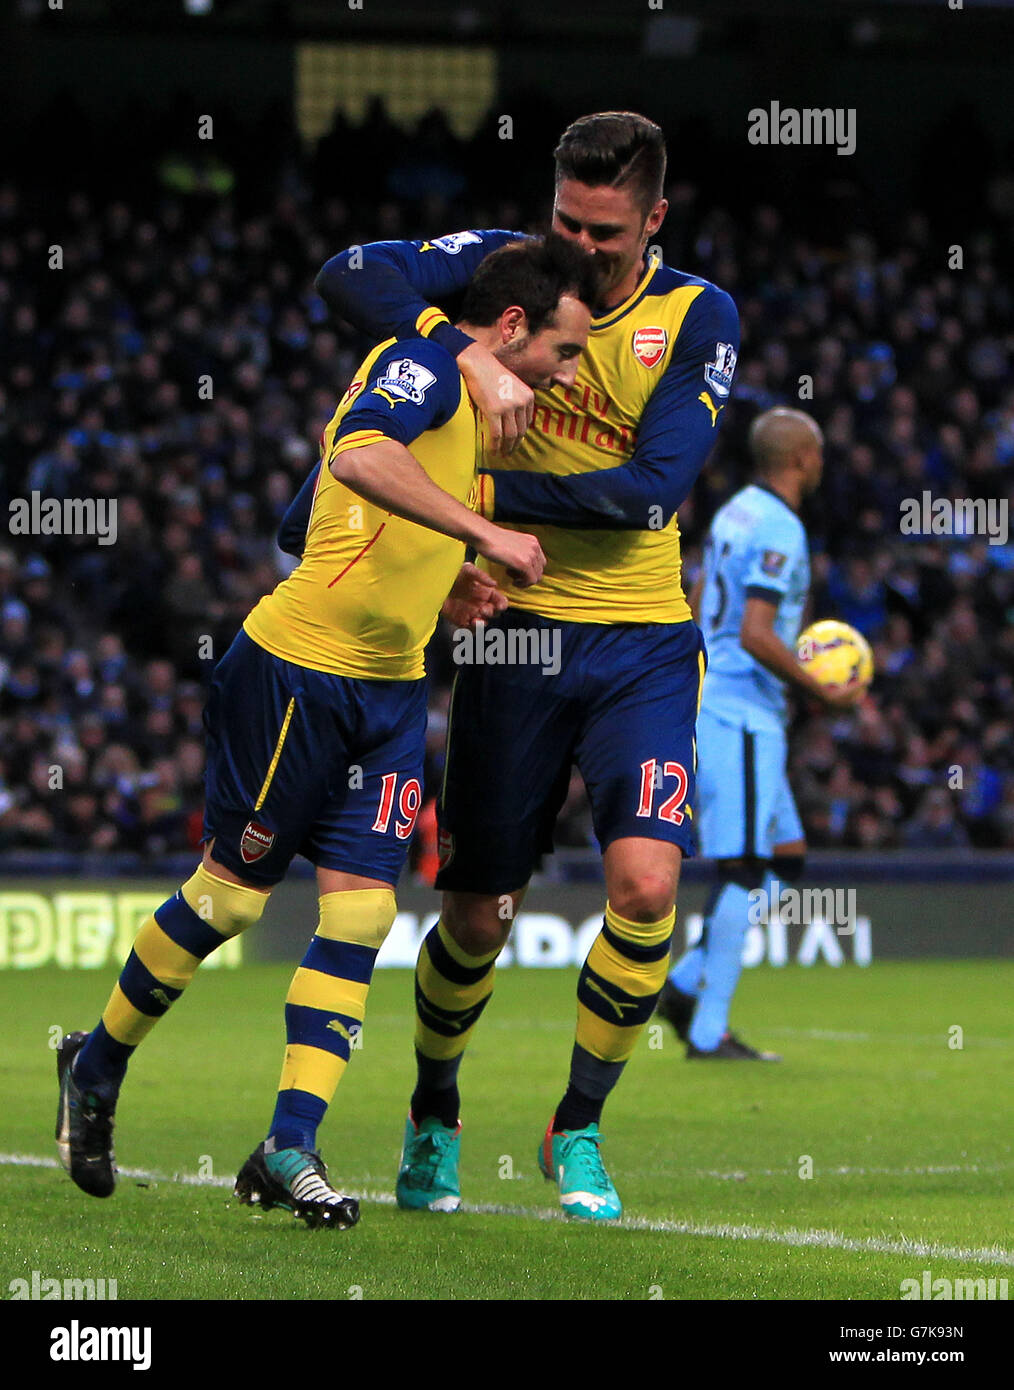 Arsenal's Santi Cazorla (left) celebrates scoring his sides first goal of the game during the Barclays Premier League match at the Etihad Stadium, Manchester. Stock Photo